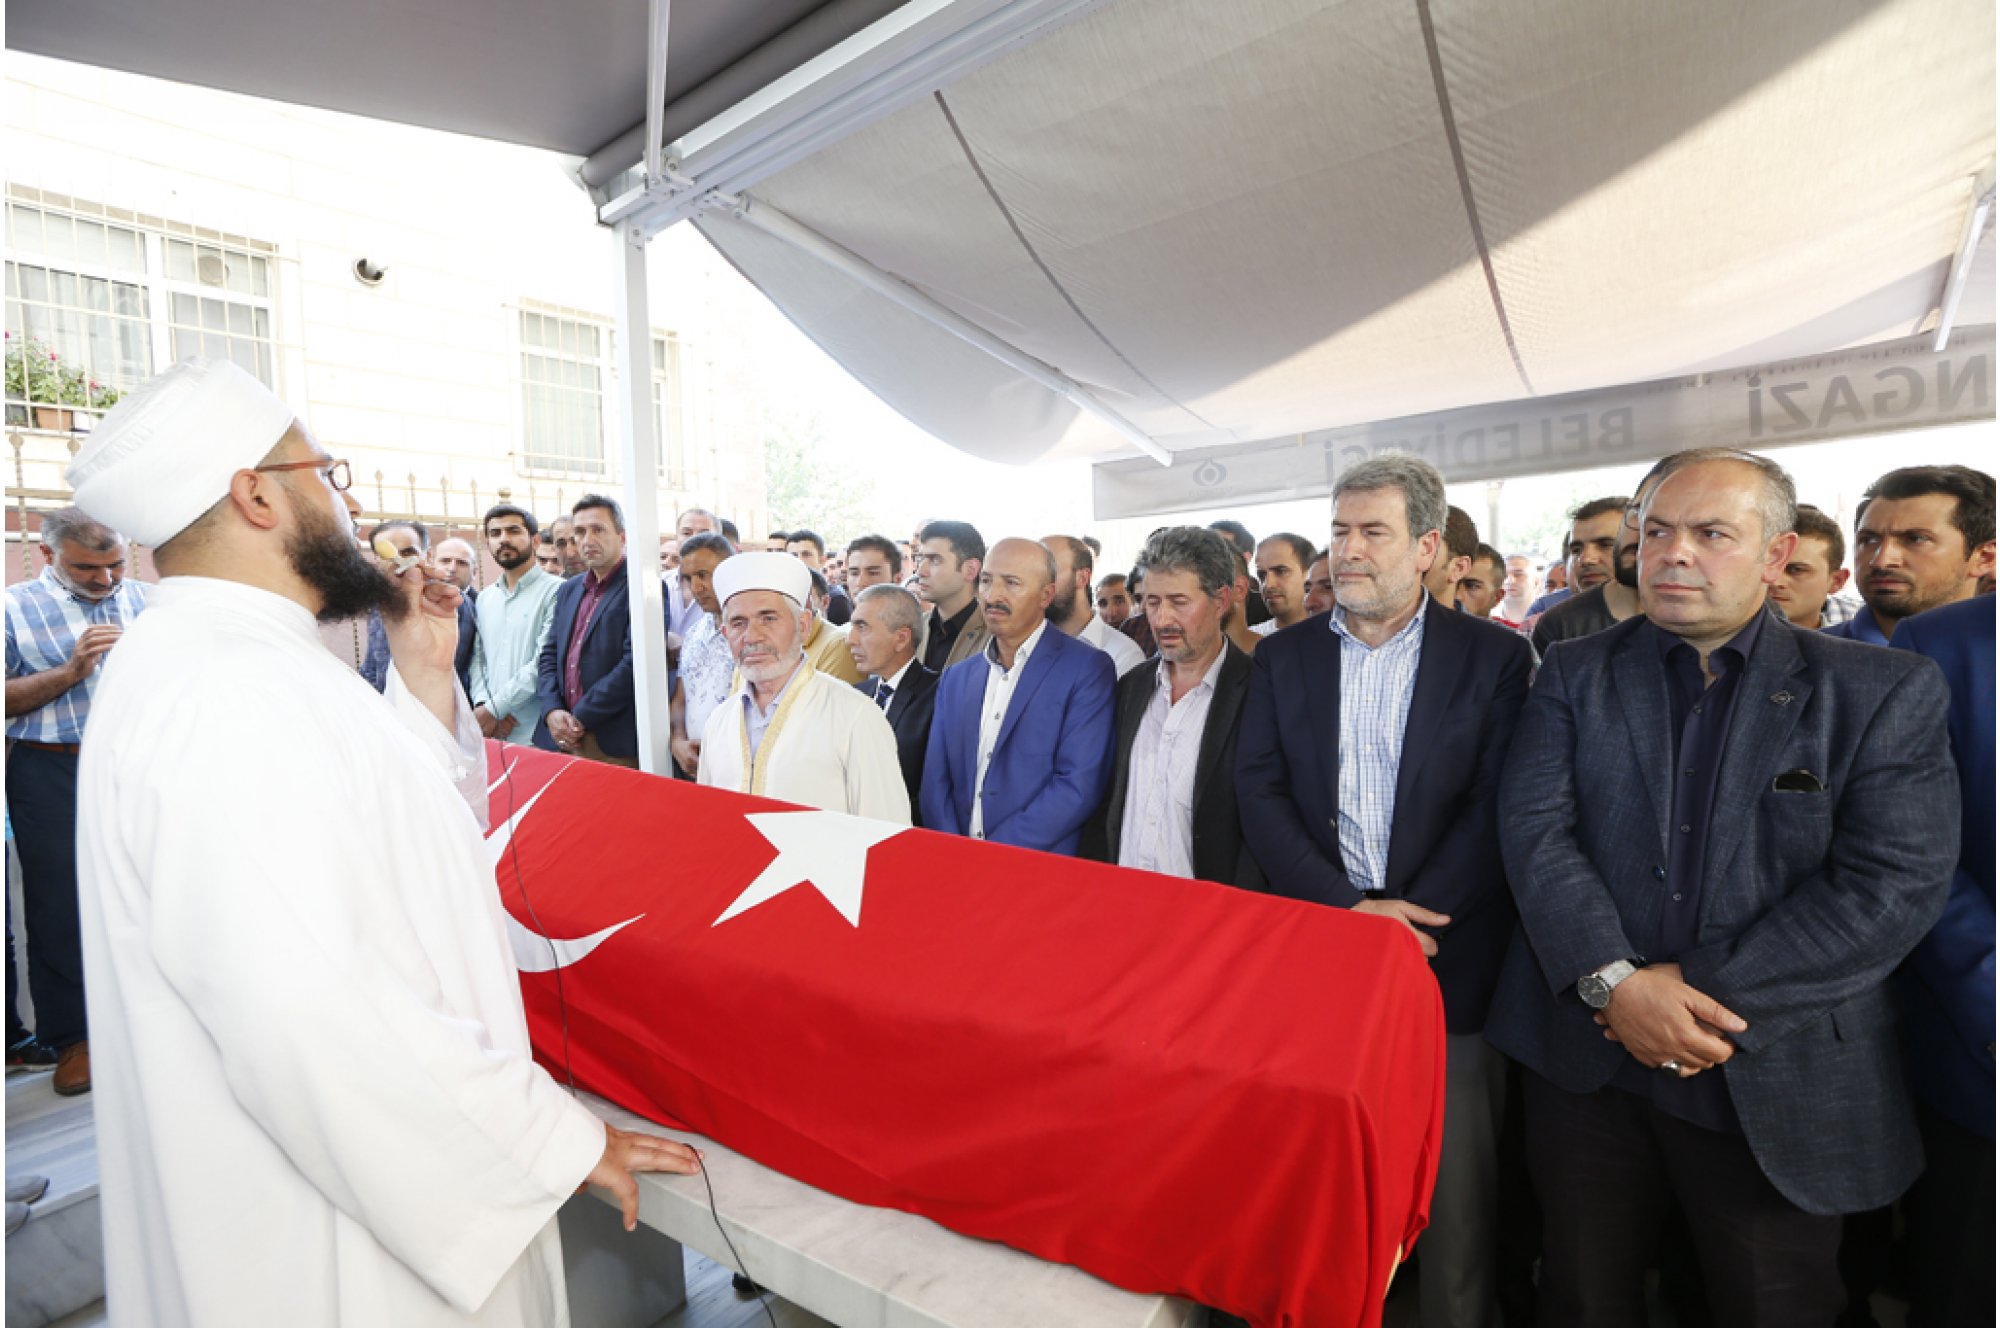 Along with his family and friends, Istanbul Deputy Halis Dalkılıç, Sultangazi Mayor Cahit Altunay and many other people attended his funeral.